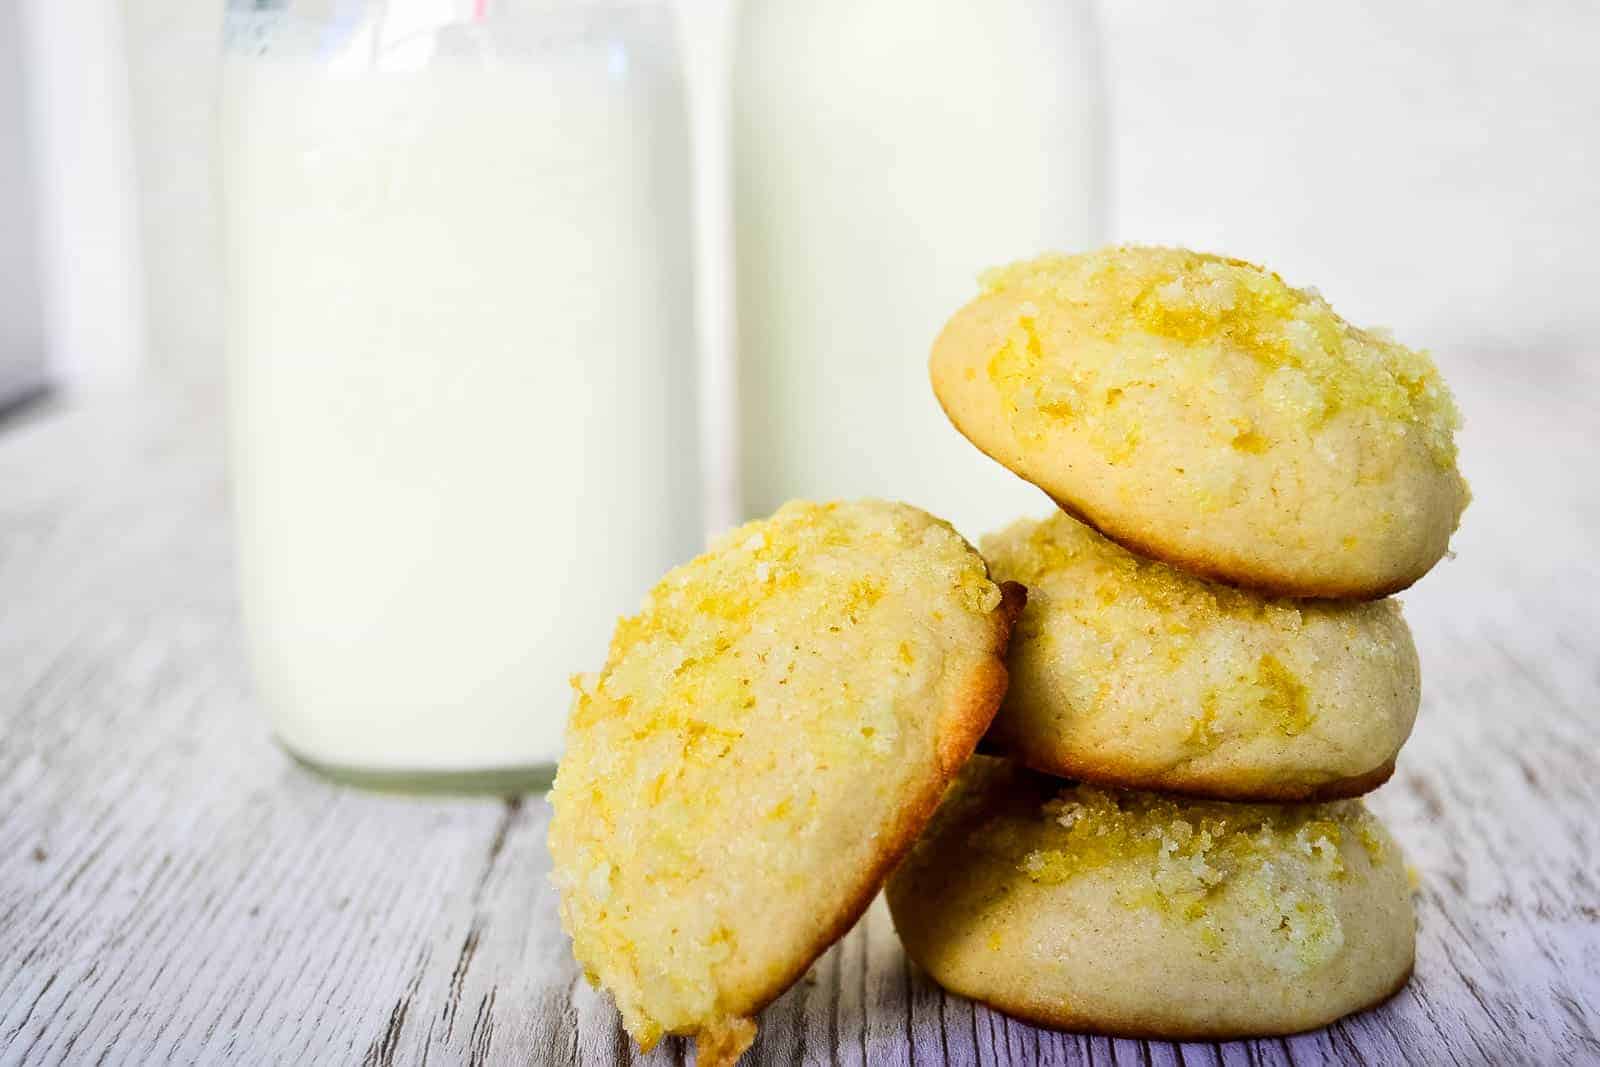 A stack of three lemon sugar cookies with one cookie leaning against the stack, in front of jars of milk.